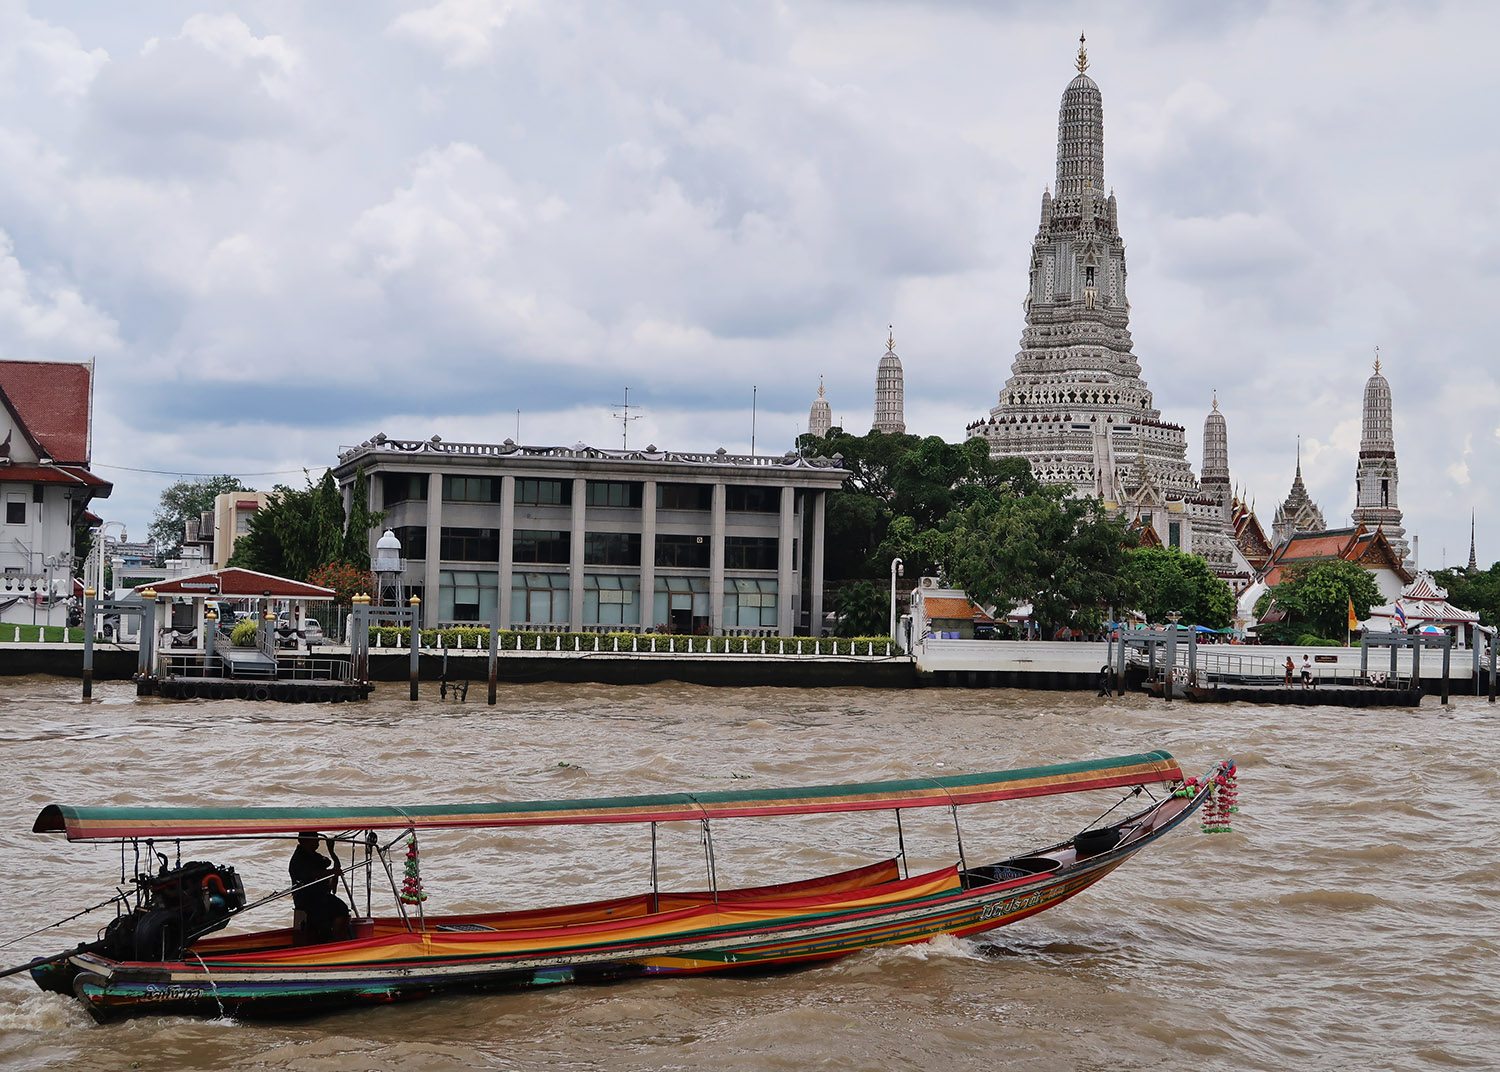 Wat Arun, a thai pagoda on the shores of a river with a small boat in the foreground